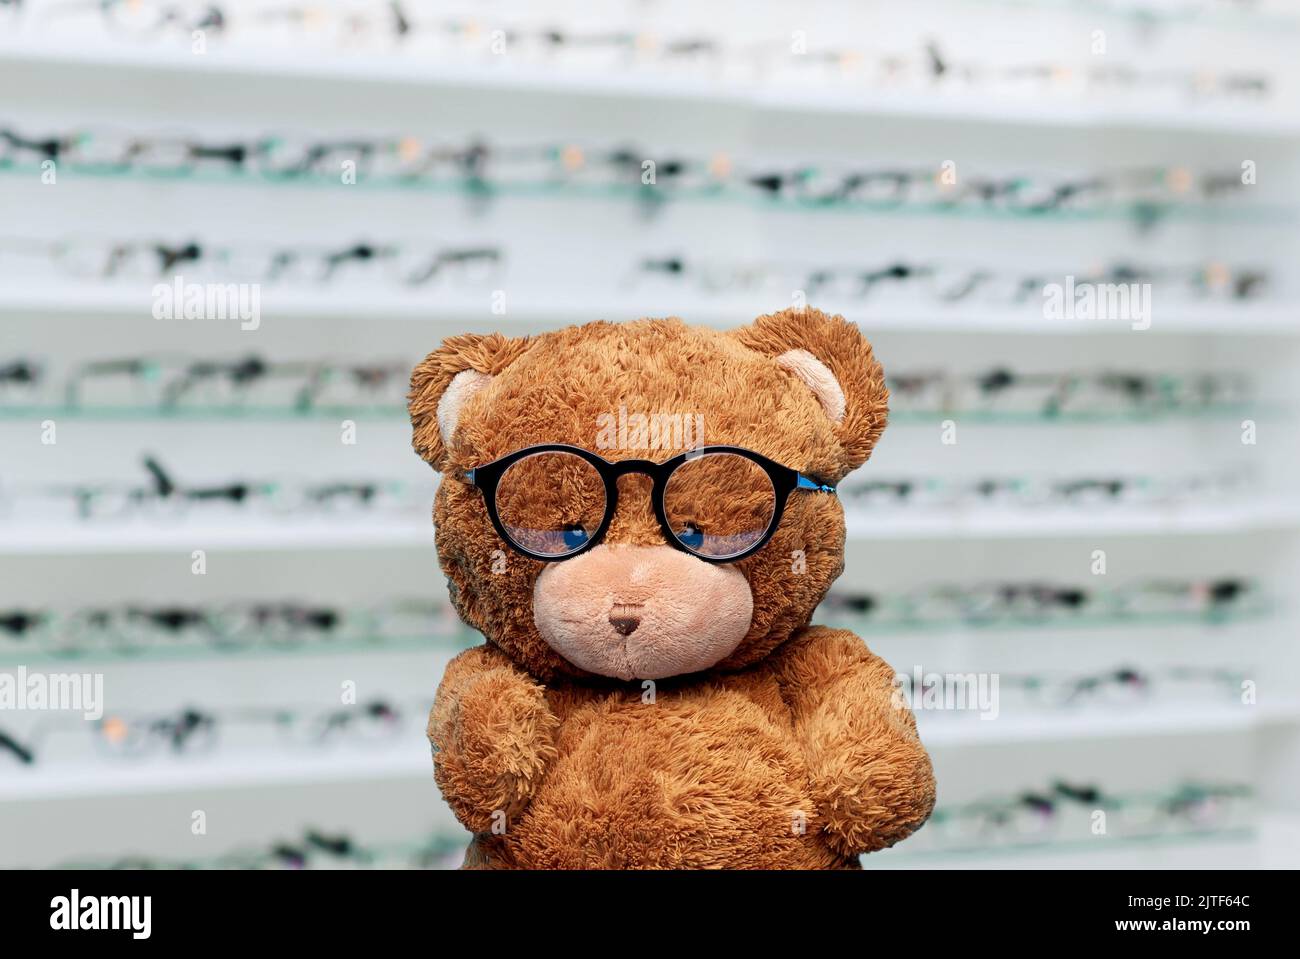 teddy bear toy in glasses over eyeglasses store Stock Photo